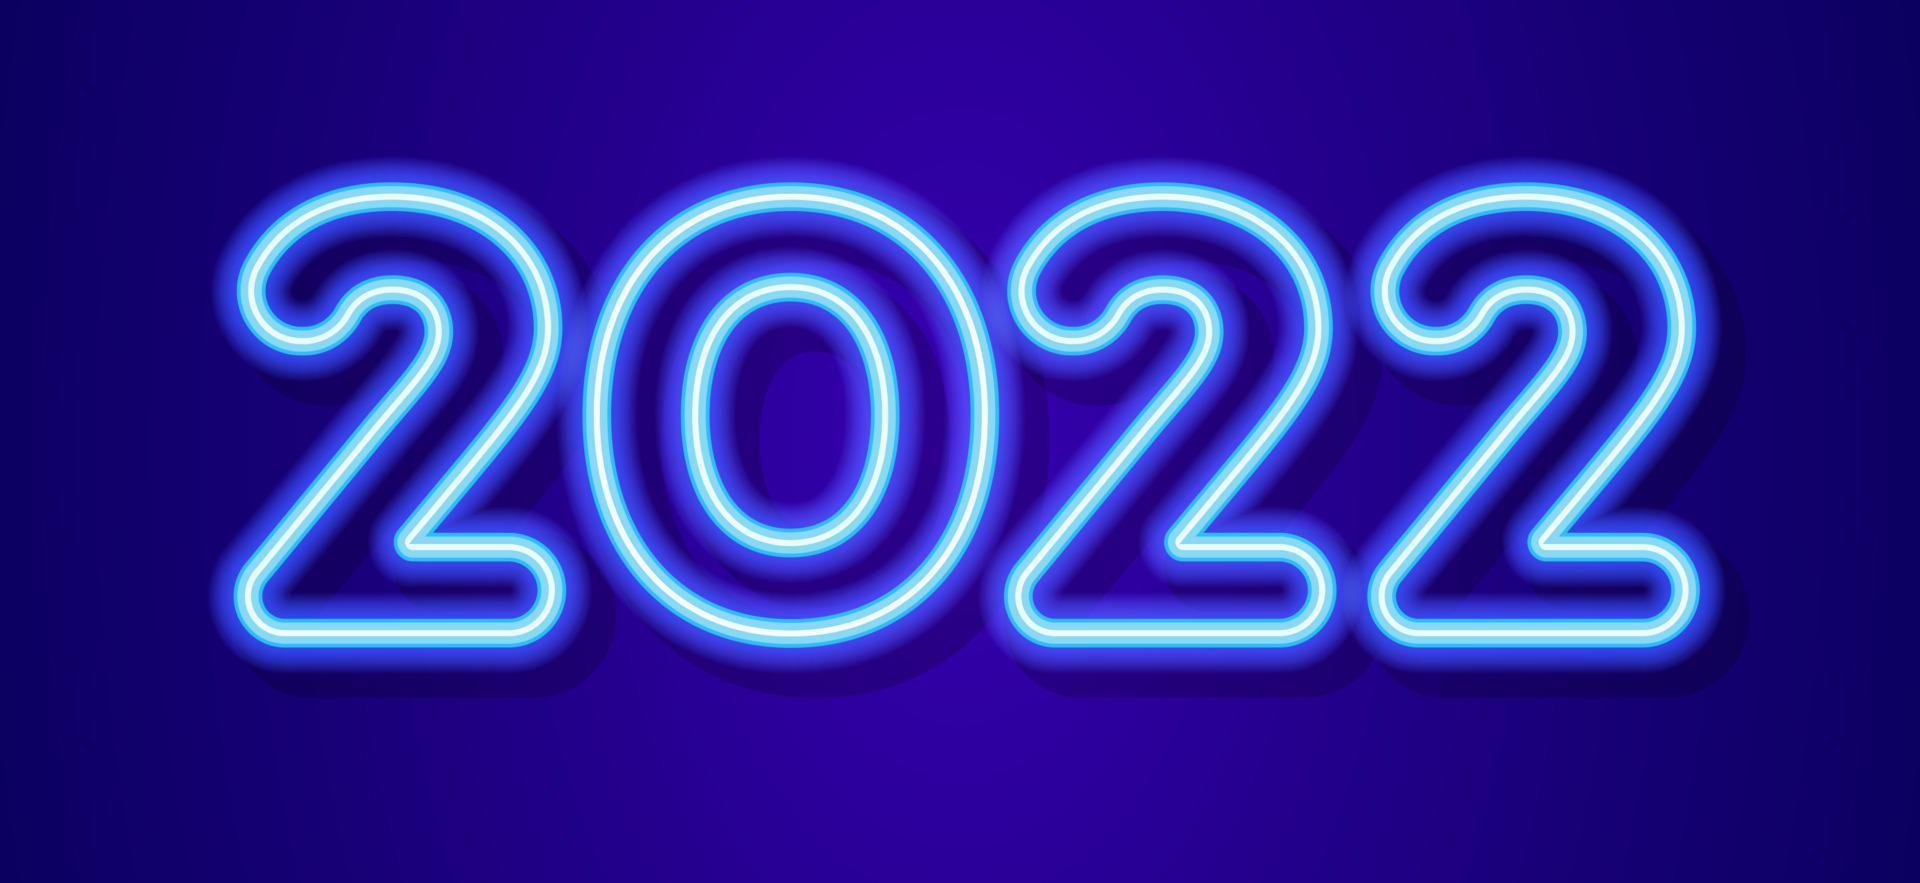 2022 sign neon style for christmas greeting card vector